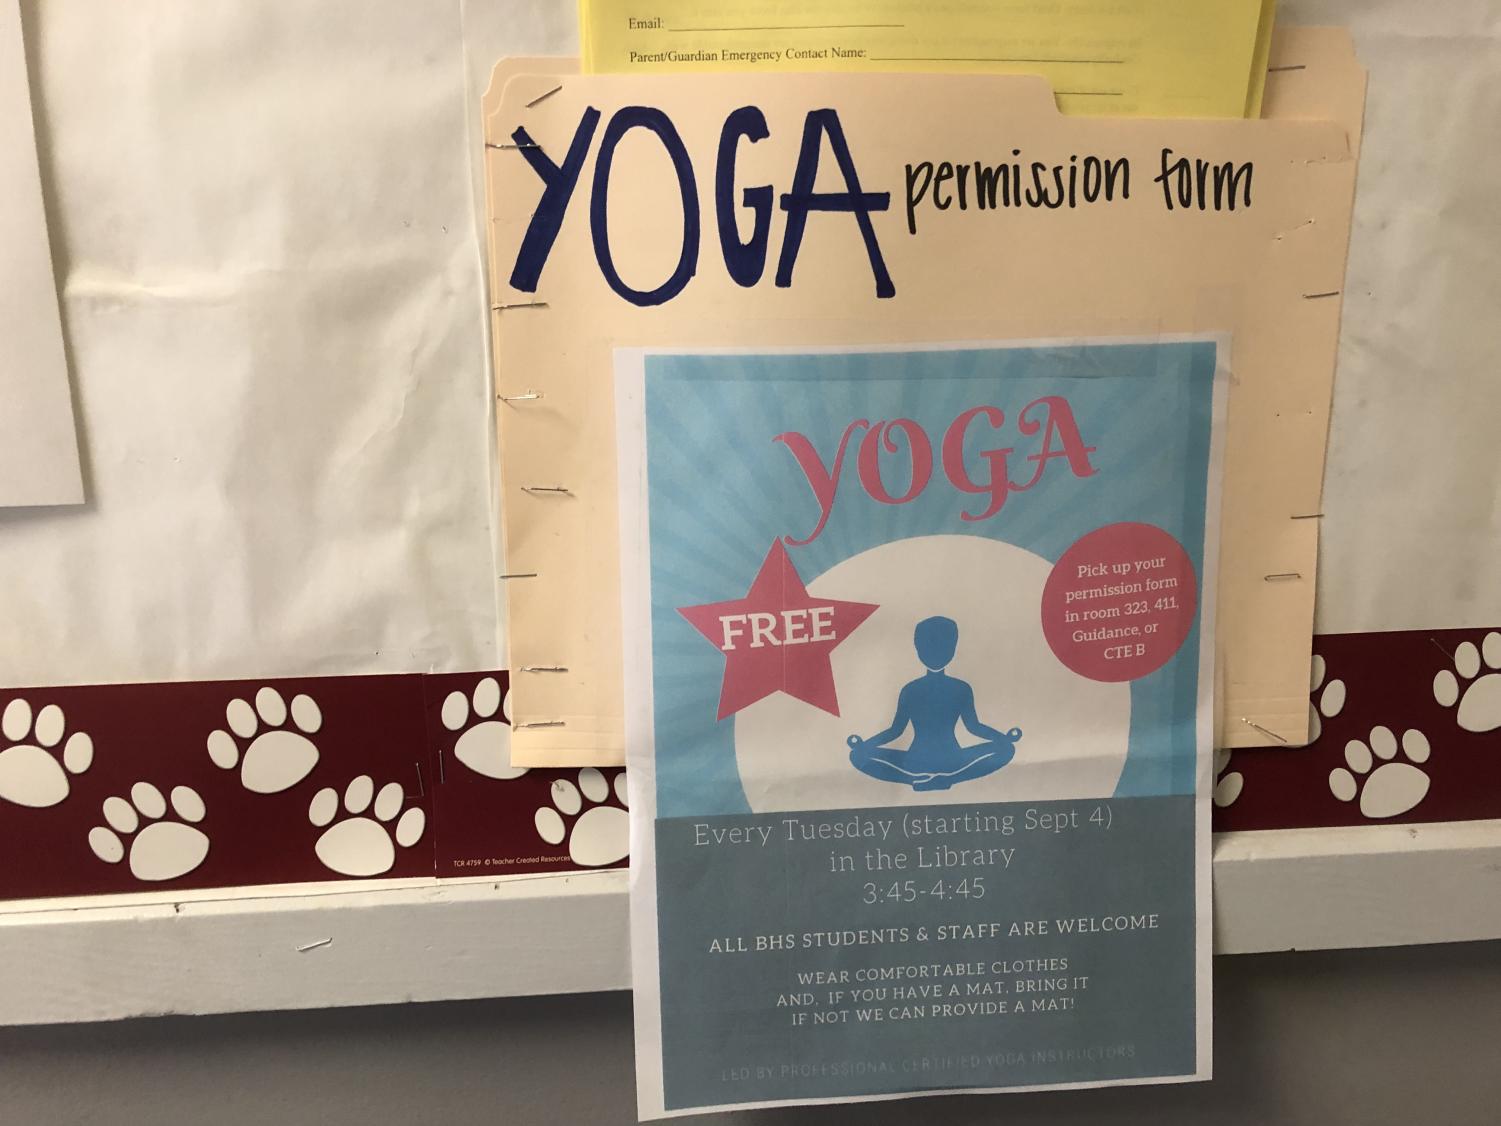 Yoga Club provides stress relief at no cost for students, staff – The Bark